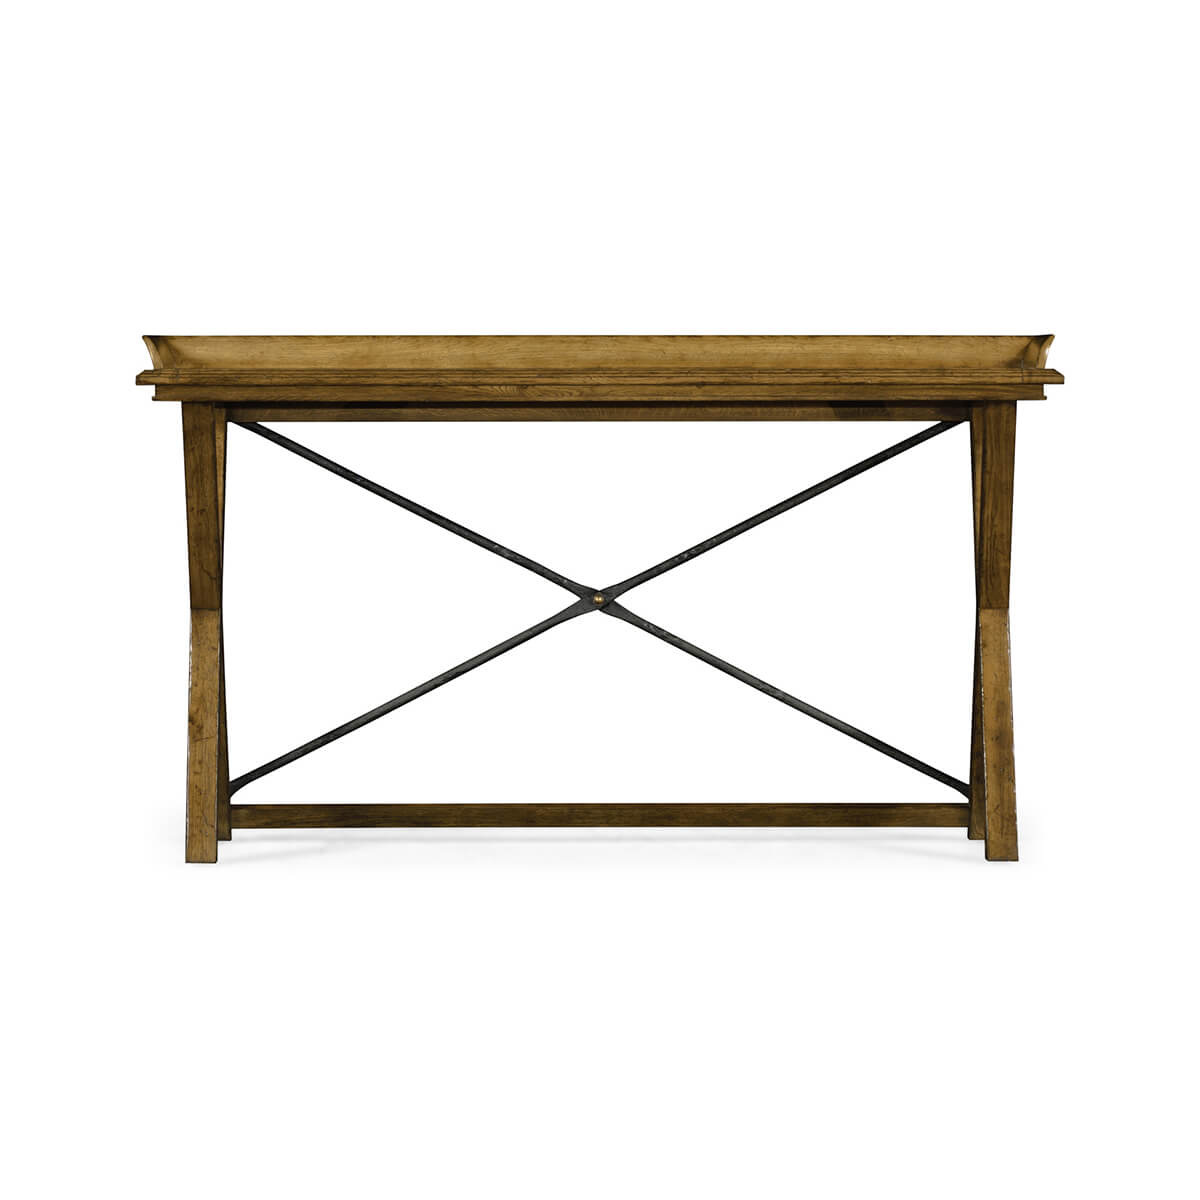 Country Chestnut Console Table - English Georgian America